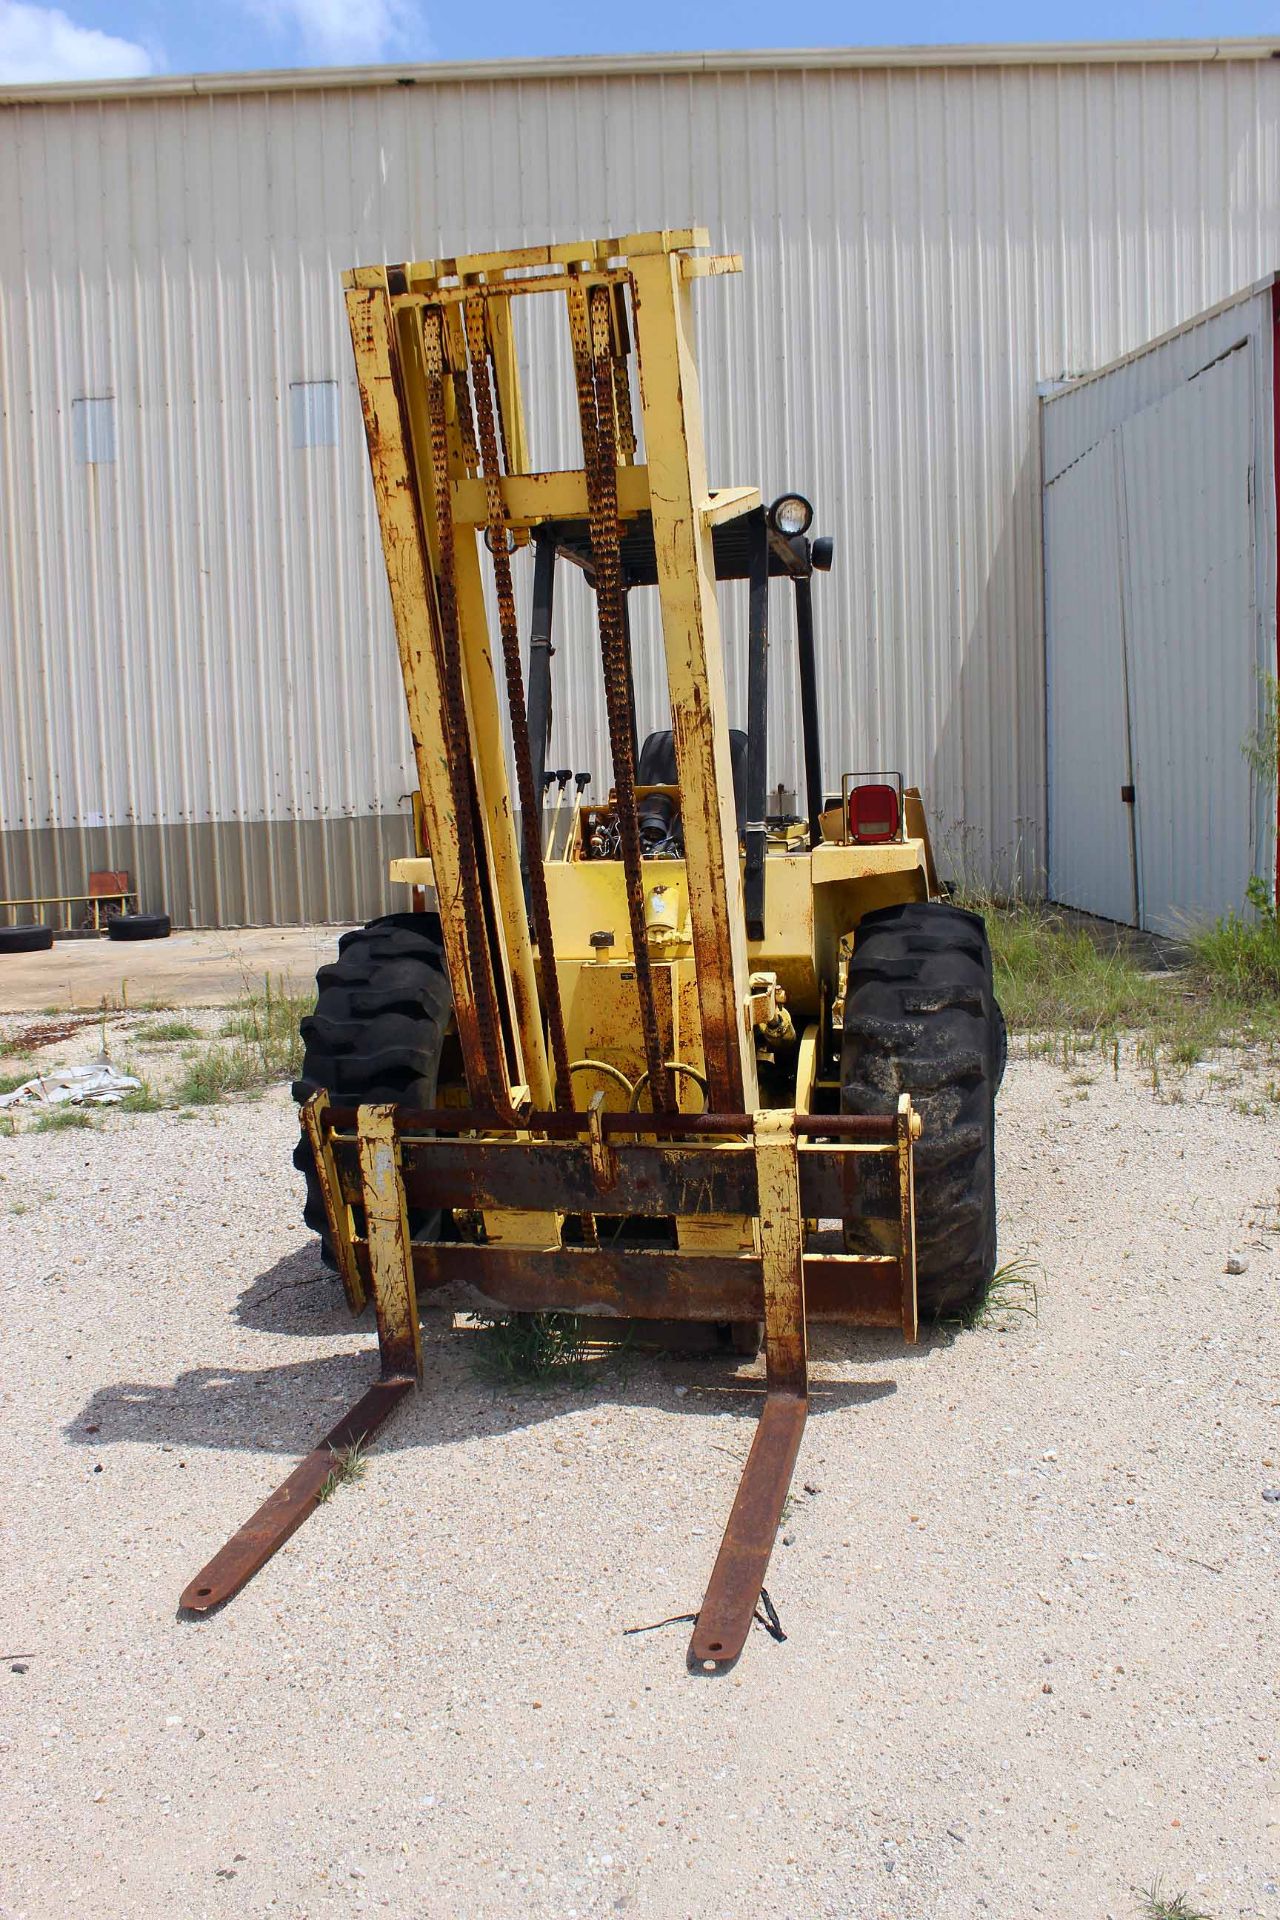 FORKLIFT, HARLO 5,000 LB. BASE CAP. MDL. HF456B, 2-stage mast, rough terrain tires (in need of - Image 2 of 4